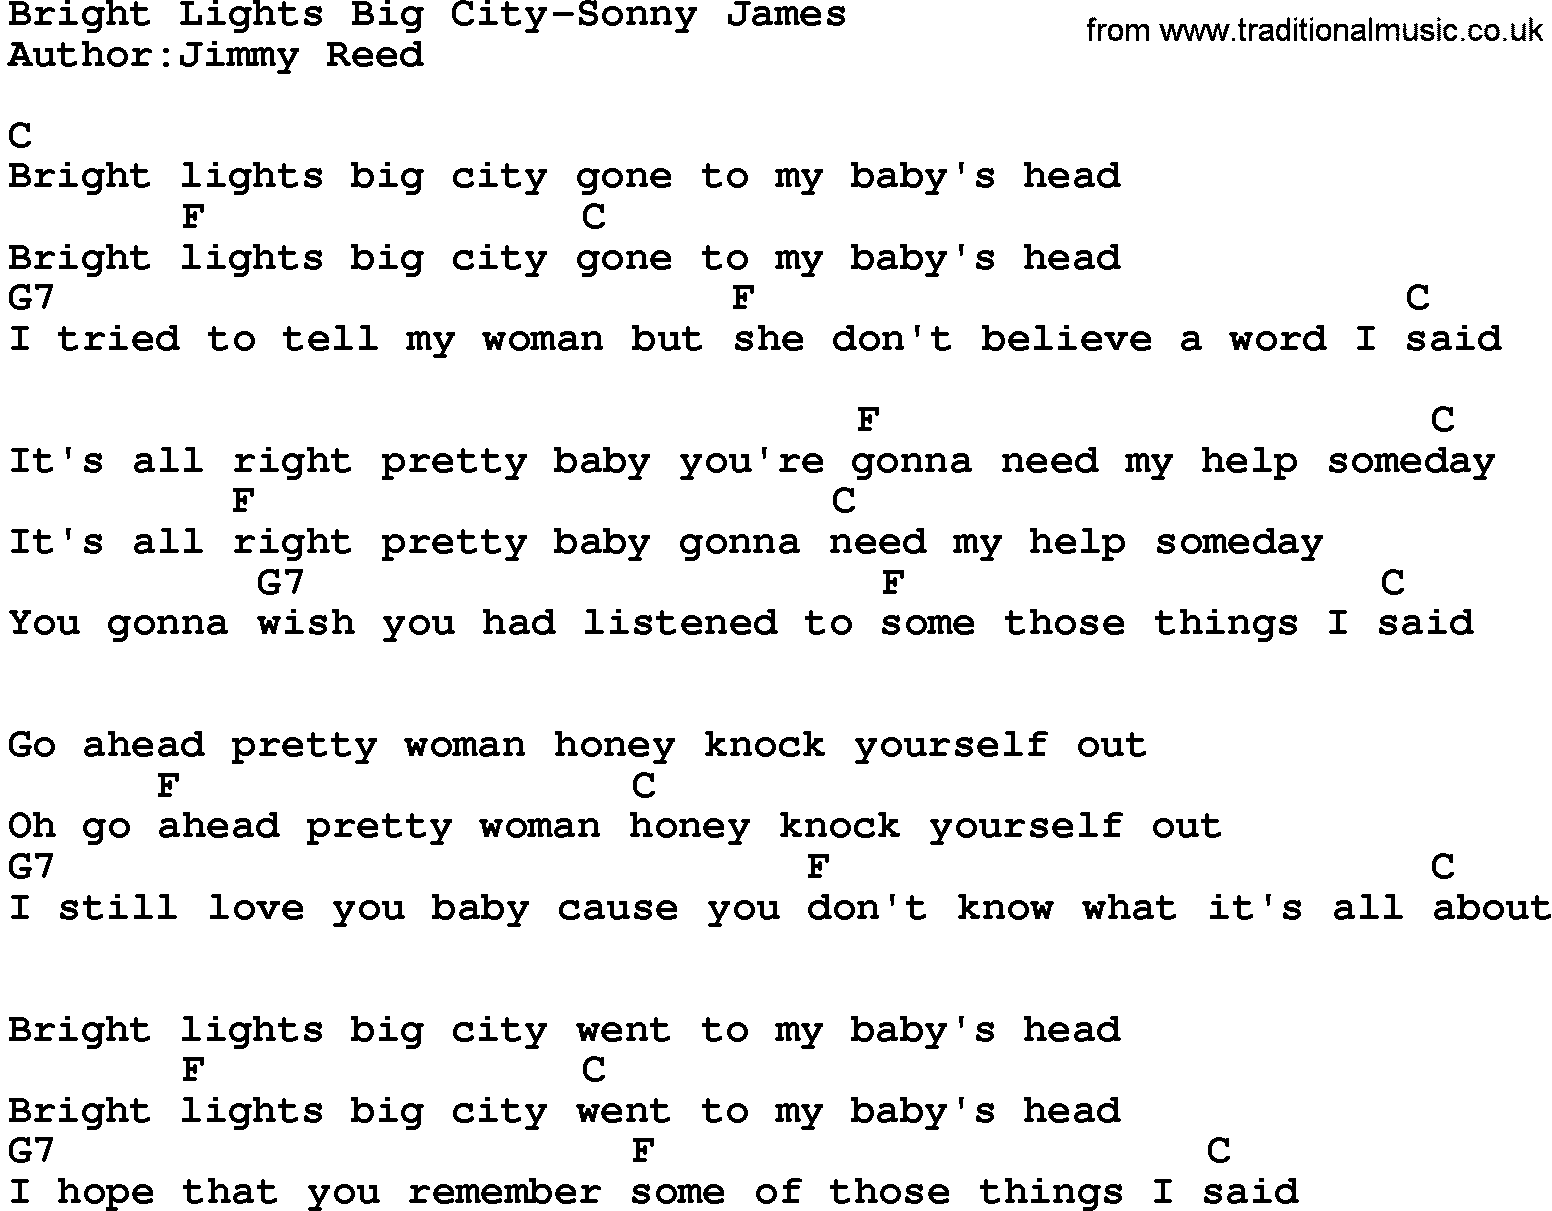 Country music song: Bright Lights Big City-Sonny James lyrics and chords